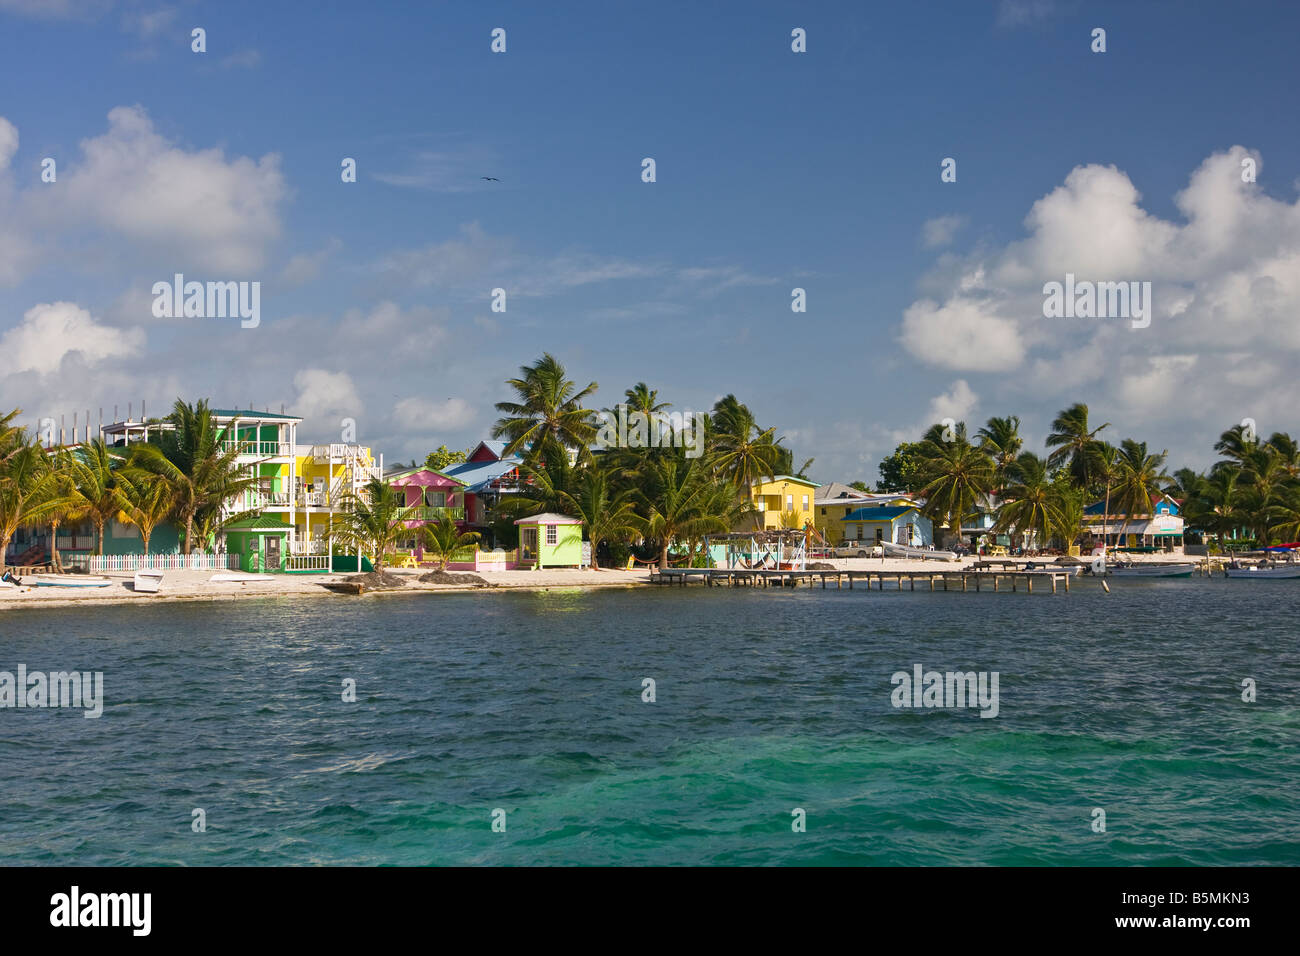 CAYE CAULKER BELIZE Waterfront showing hotels houses and palm trees Stock Photo